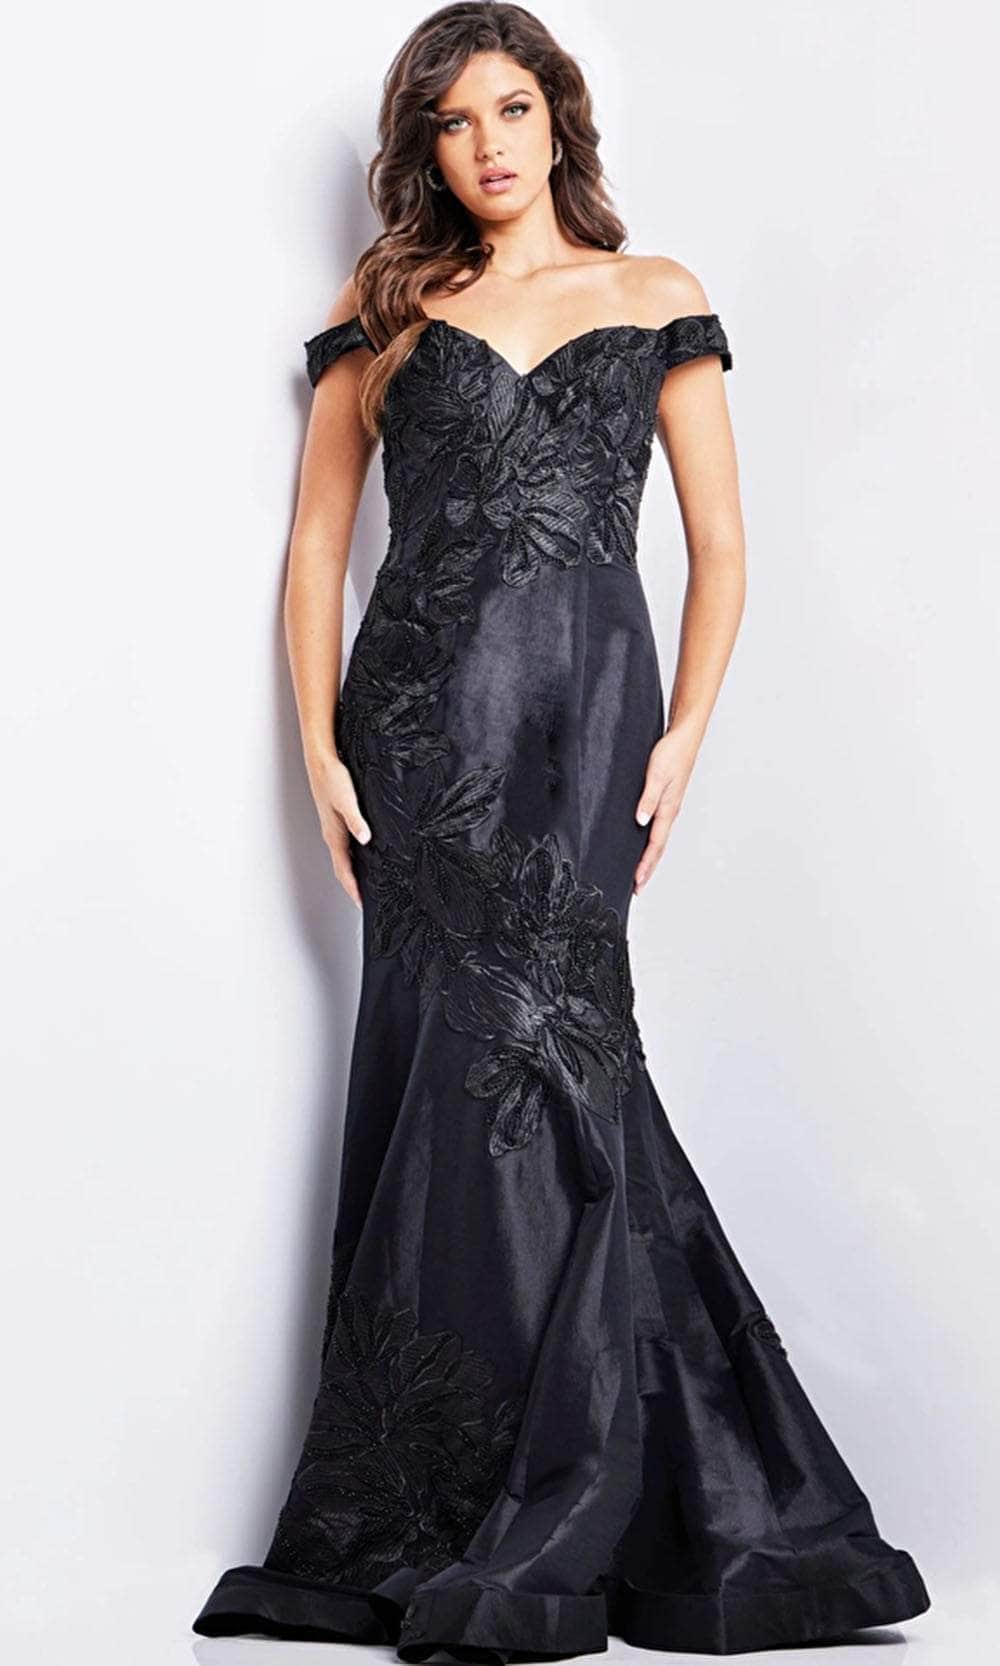 Image of Jovani 23928 - Embroidered Sweetheart Neck Dress